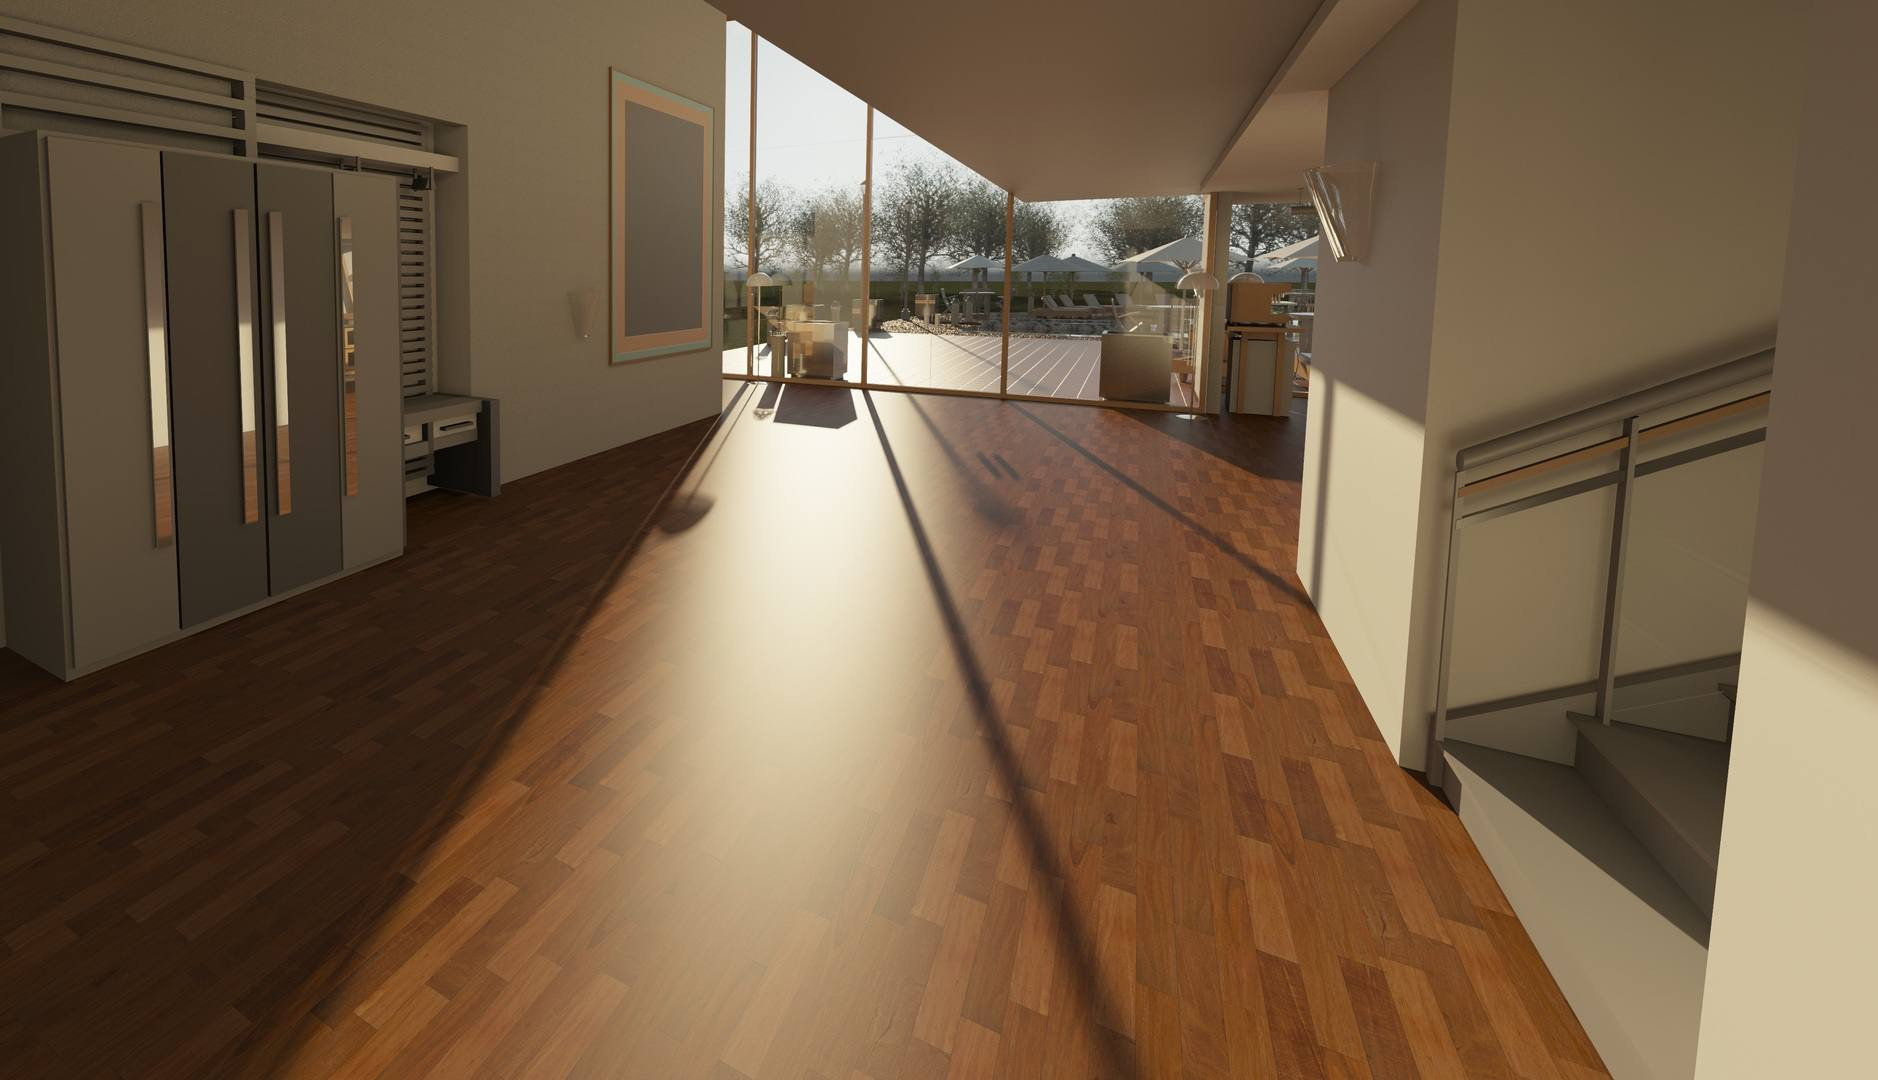 24 Stylish Laminate Hardwood Flooring Cost Installed 2024 free download laminate hardwood flooring cost installed of common flooring types currently used in renovation and building regarding architecture wood house floor interior window 917178 pxhere com 5ba27a2